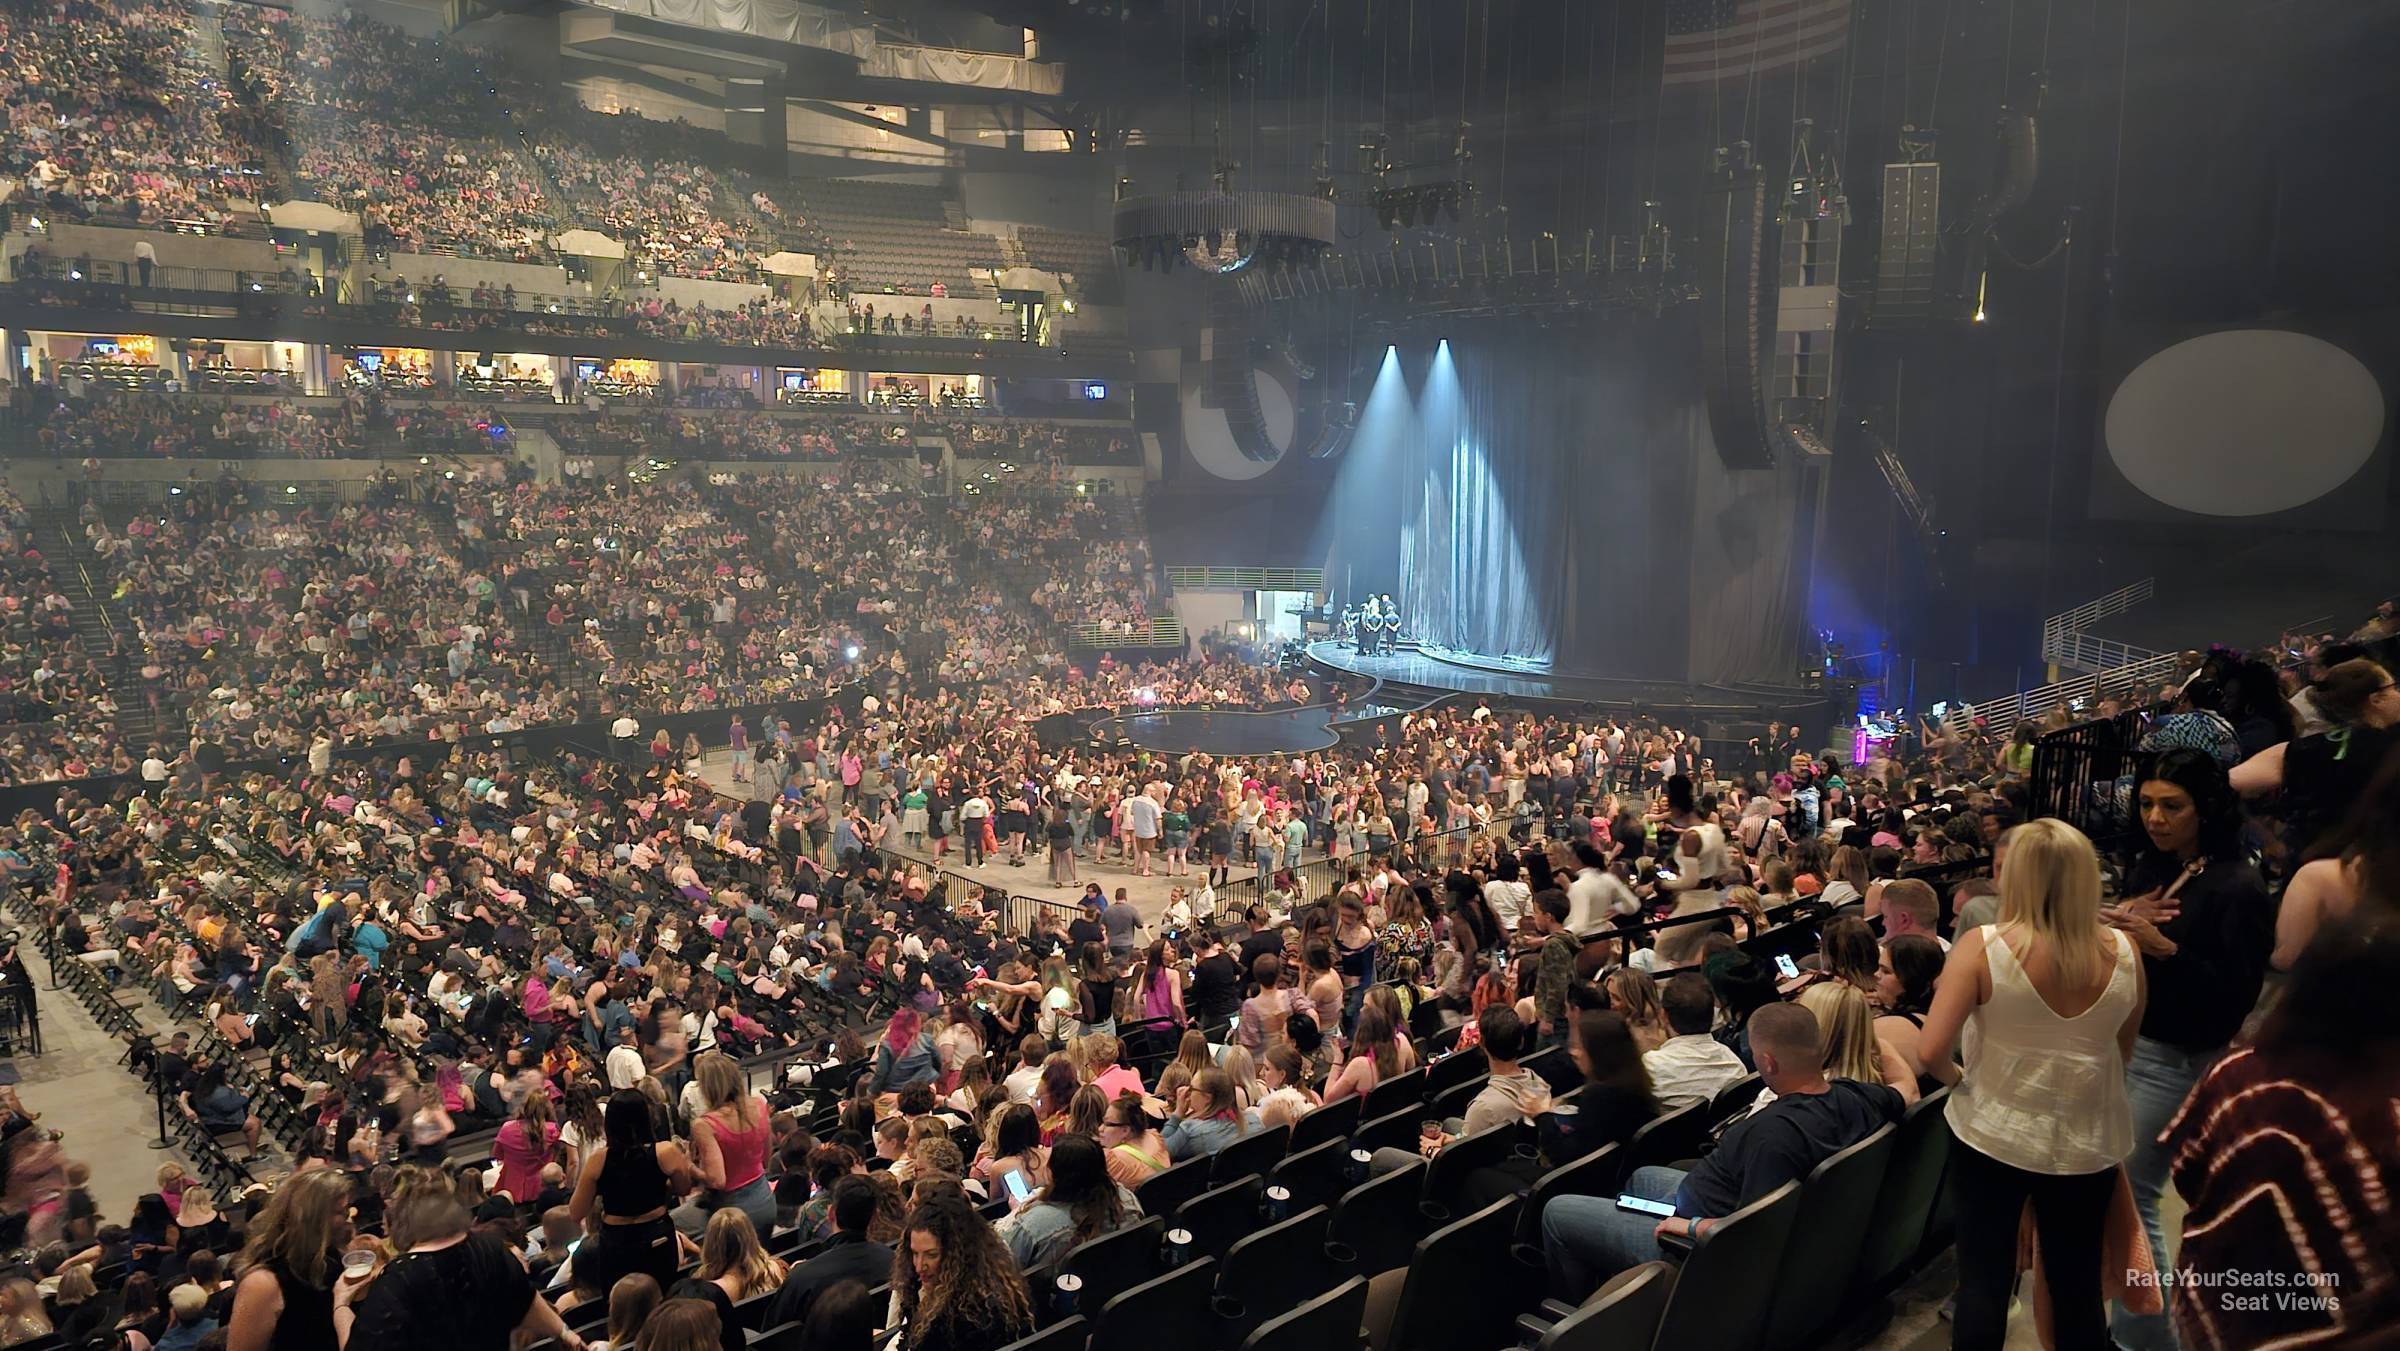 section 107, row bb seat view  for concert - chi health center omaha